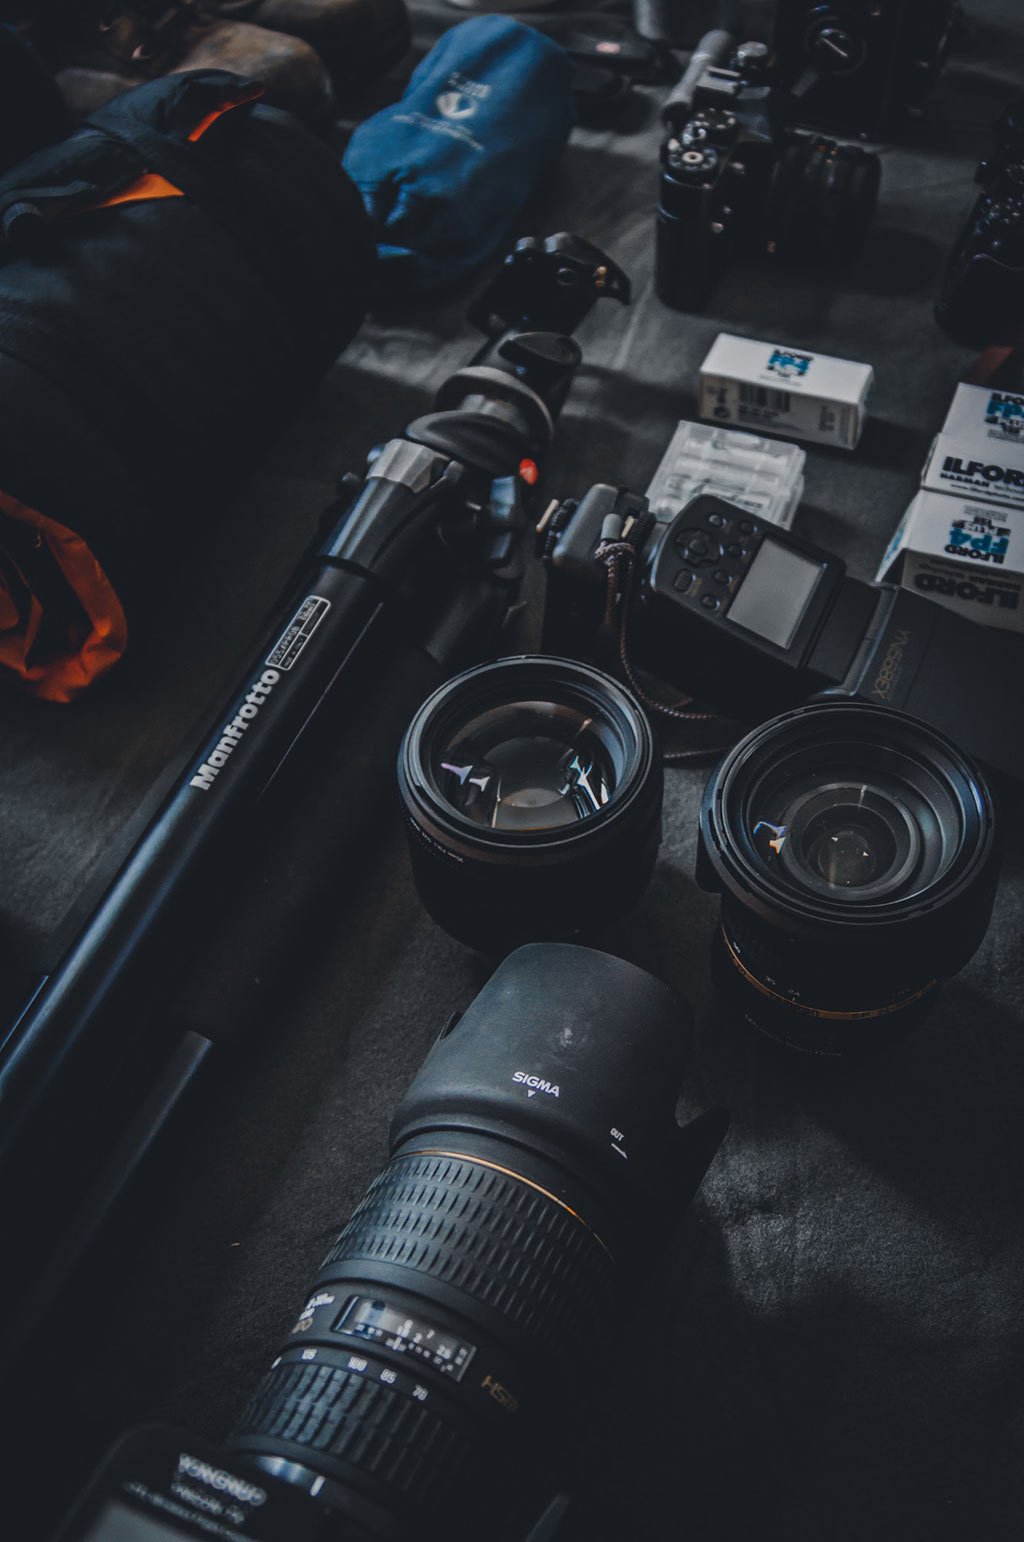 Camera Gear For Travel - Vacation Photography Guide